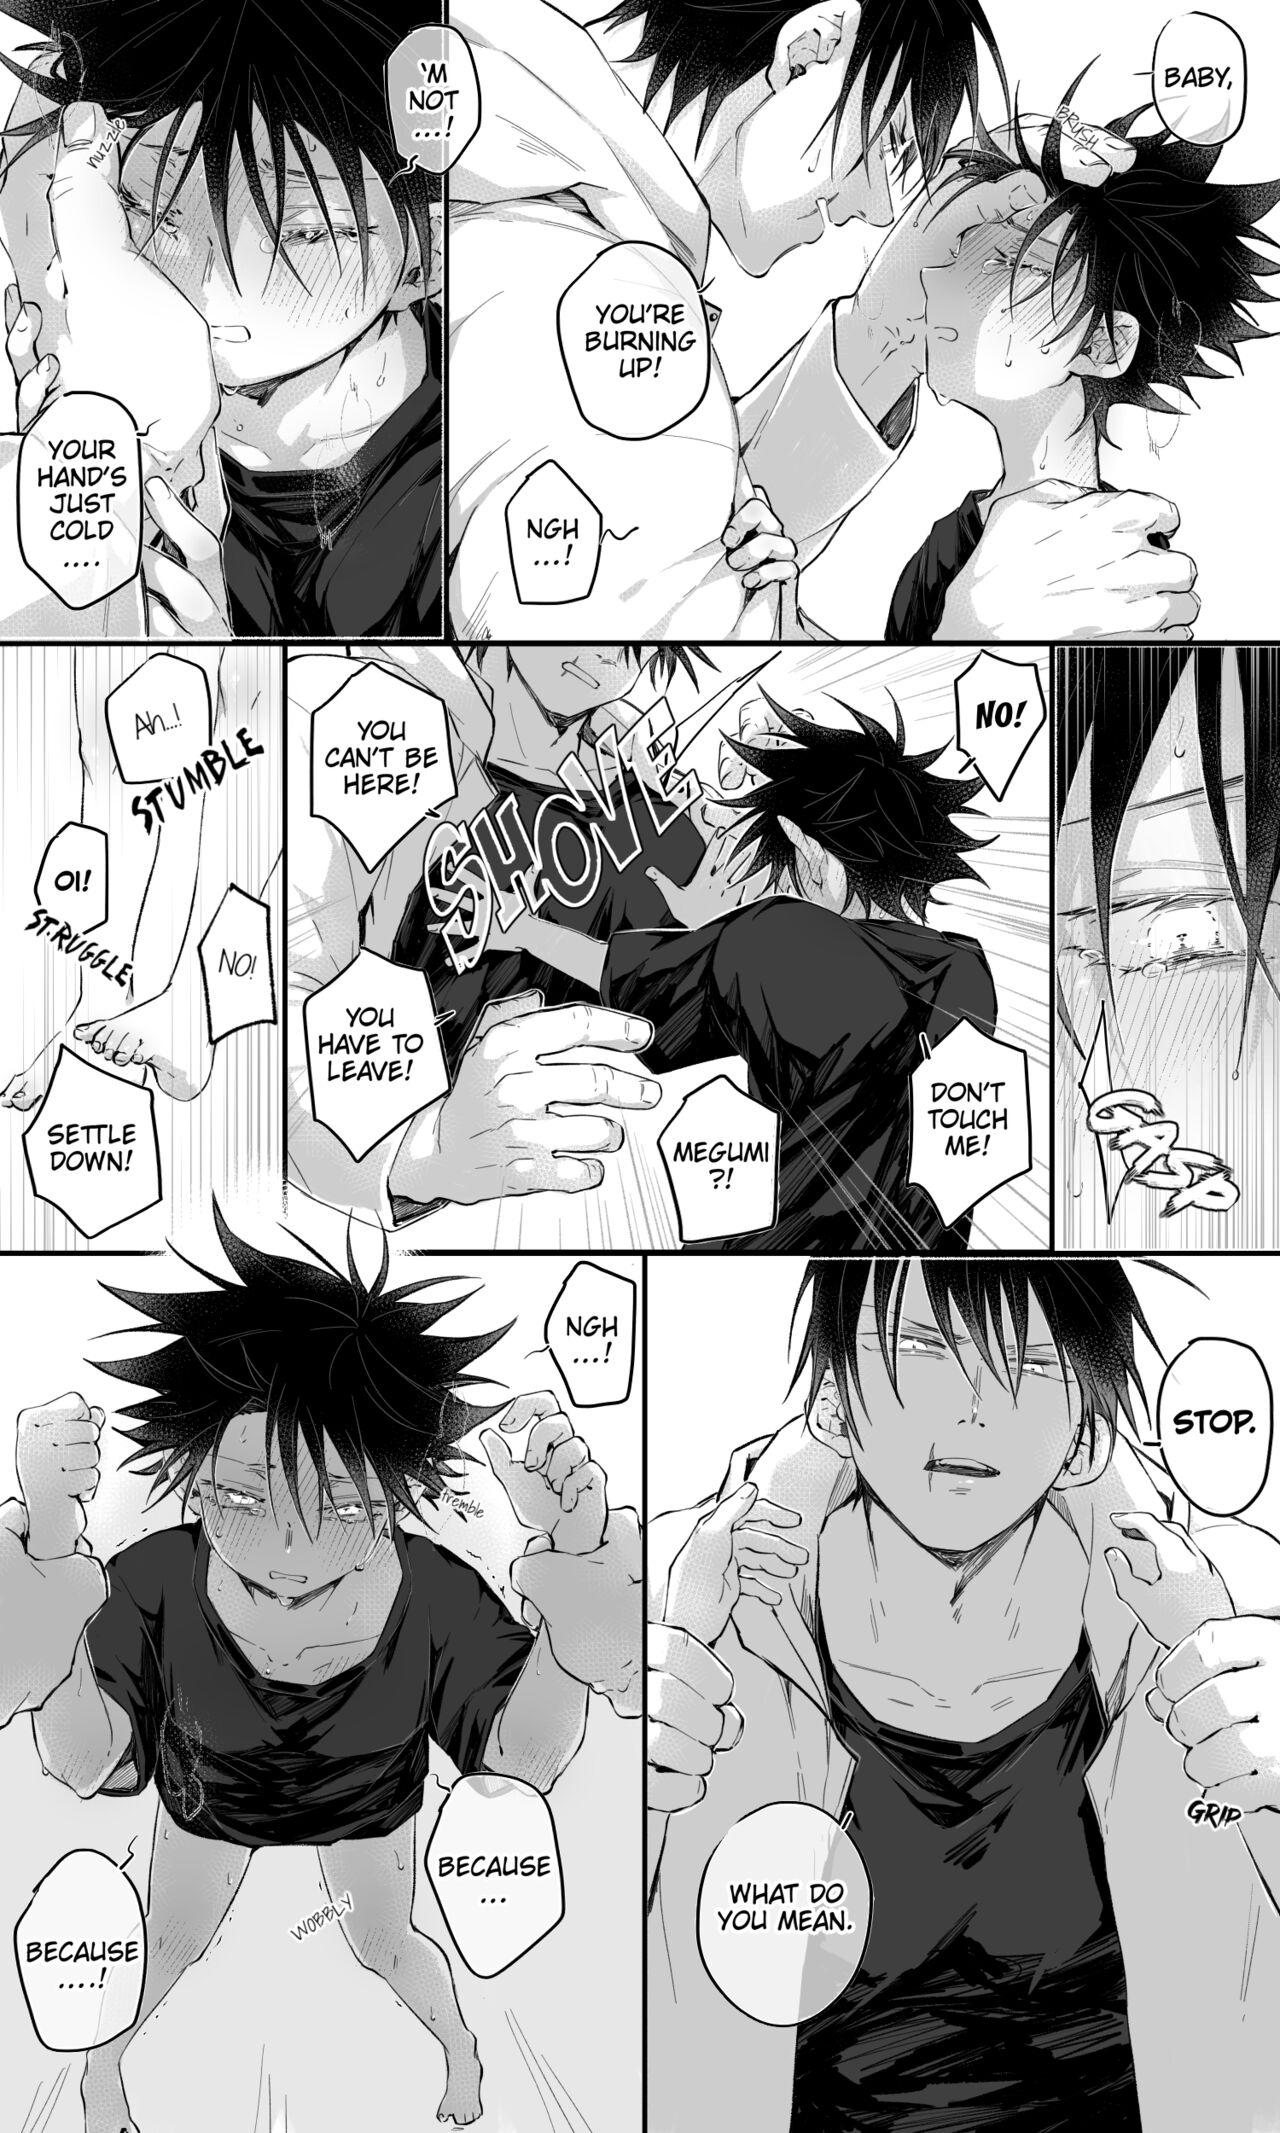 Orgasms Shotagumi doesn’t feel well and gets hugs and kisses - Jujutsu kaisen Hand Job - Page 2